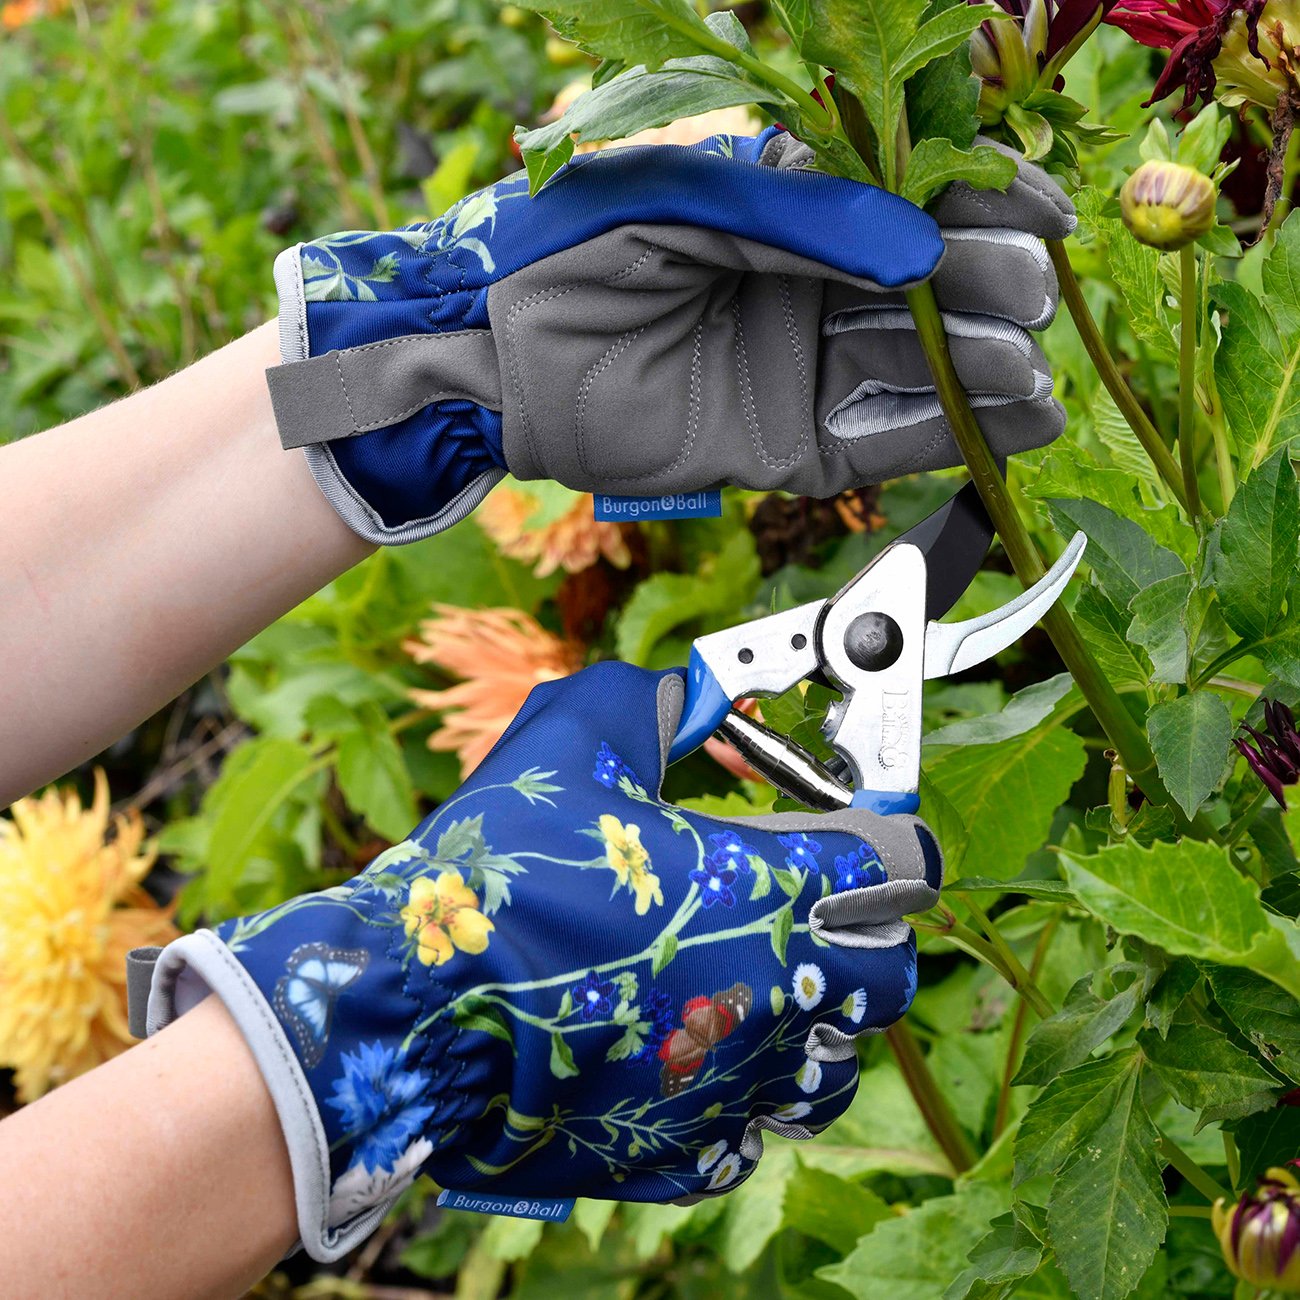 As a treat for yourself or as a beautiful and thoughtful gardening gift, these lovely ladies’ gardening gloves bring a touch of RHS style to the garden.